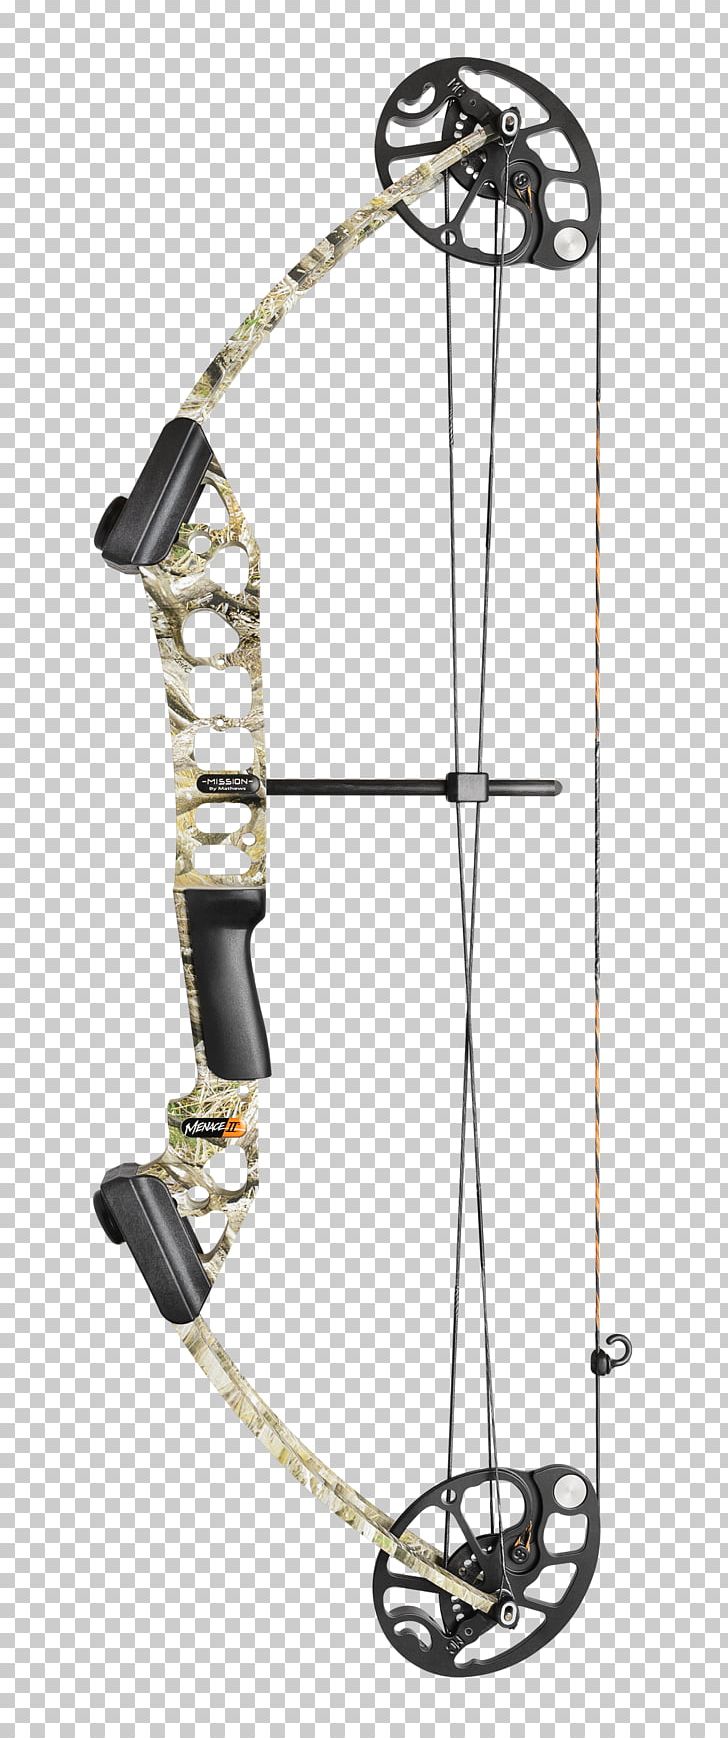 Archery Country Compound Bows Bow And Arrow Hunting PNG, Clipart, Archery, Archery Country, Arrow, Bow, Bow And Arrow Free PNG Download